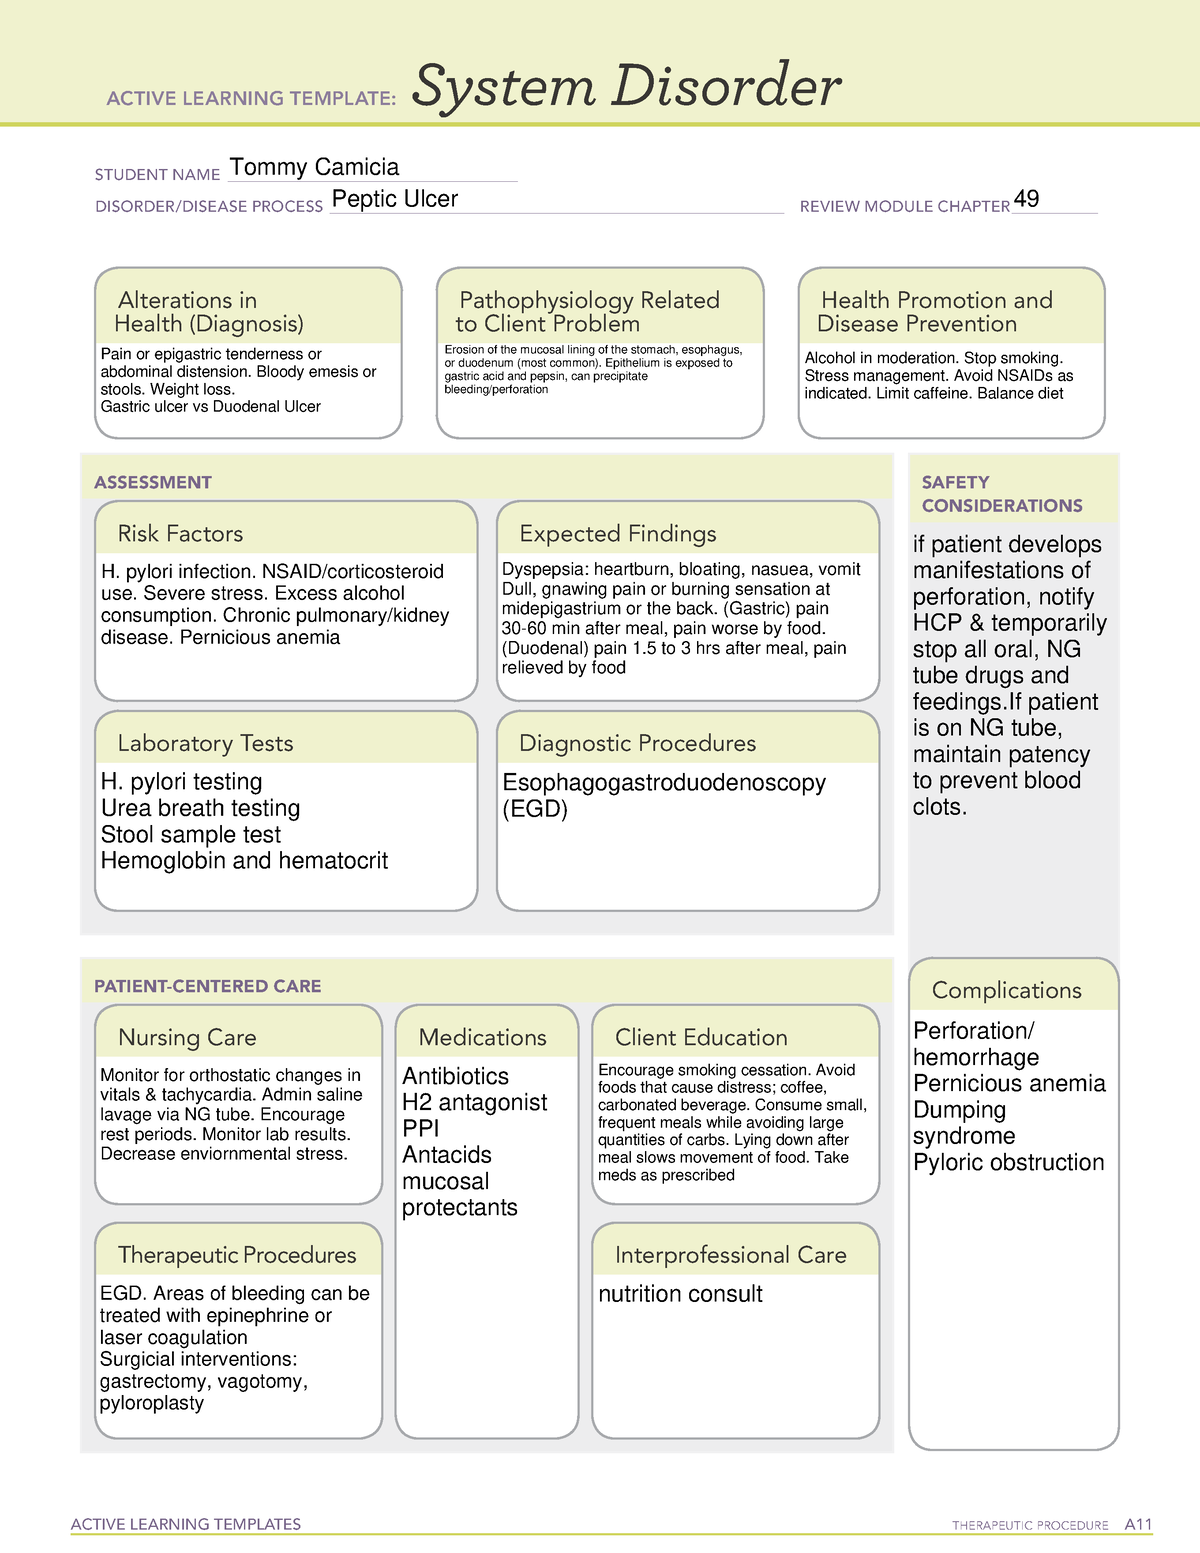 ATI template System disorder Peptic ulcer ACTIVE LEARNING TEMPLATES